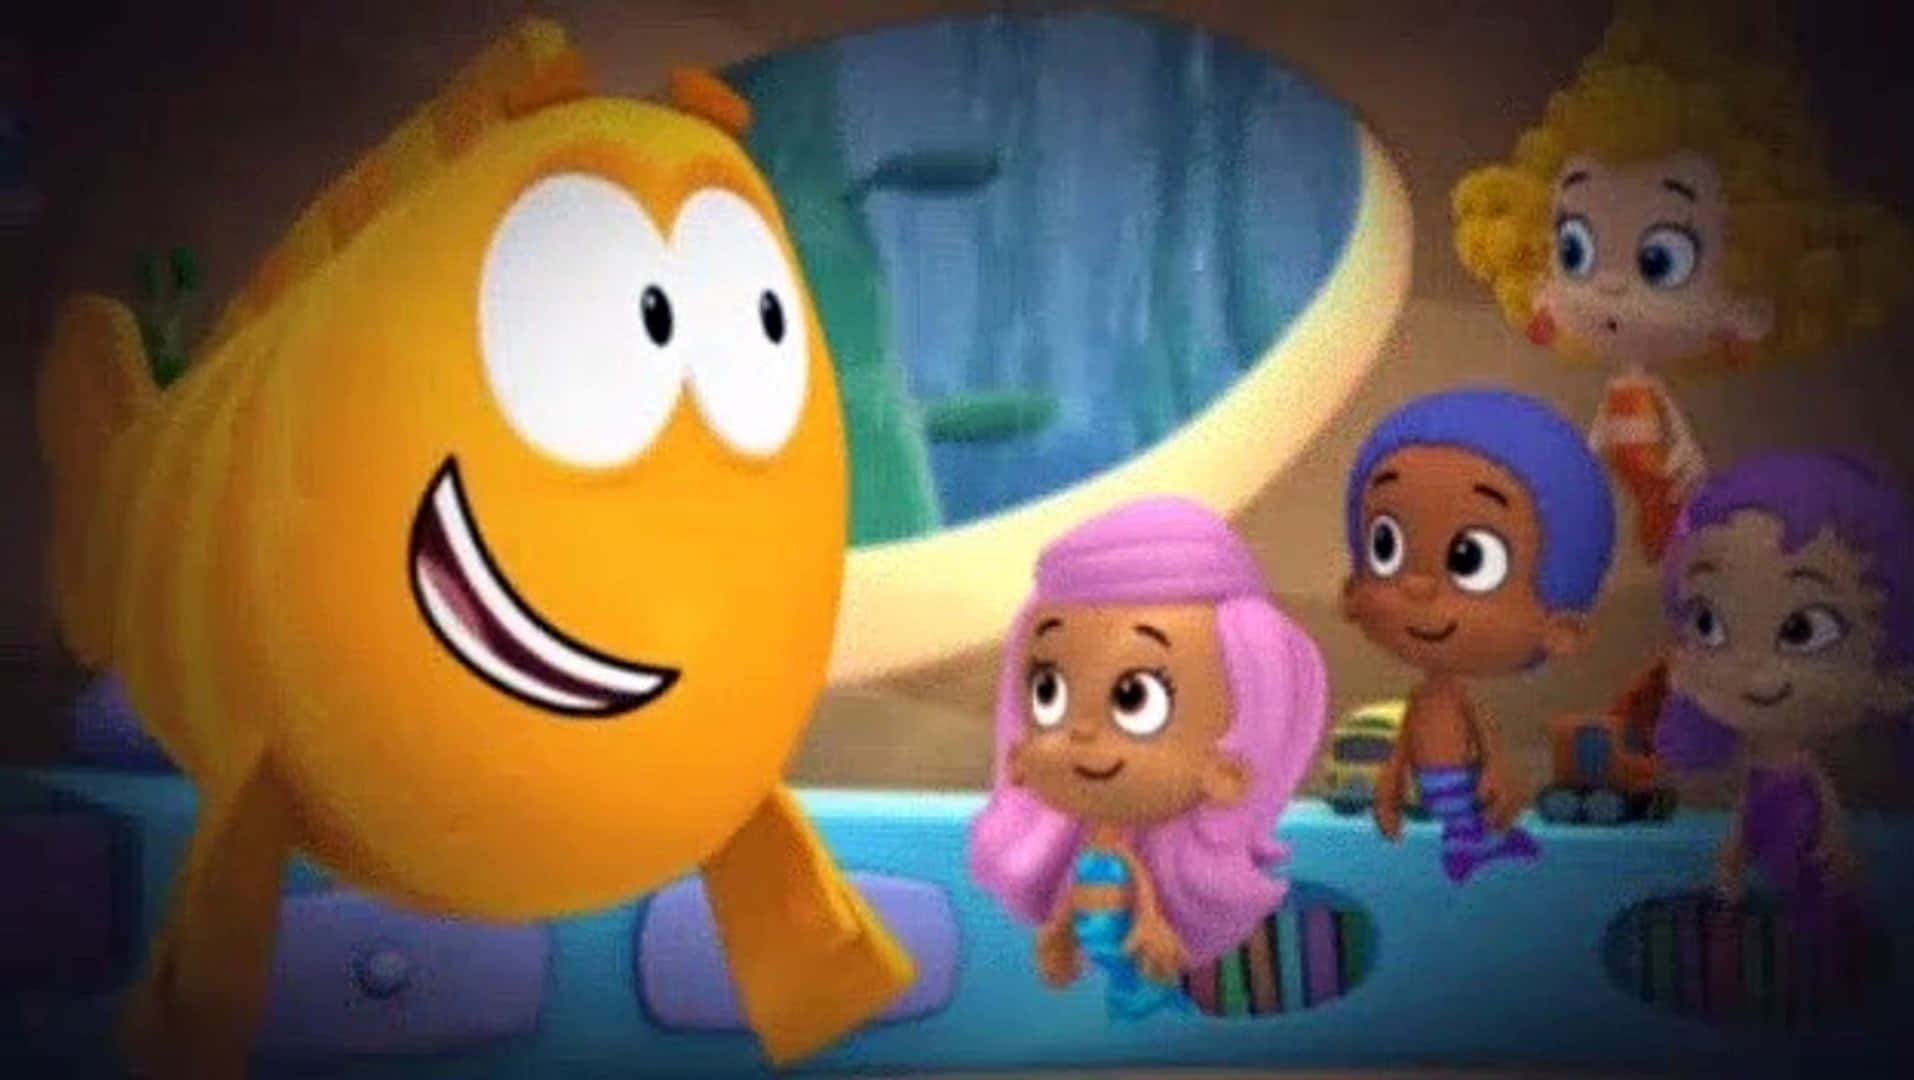 The Bubble Guppies Characters Smiling With Joy